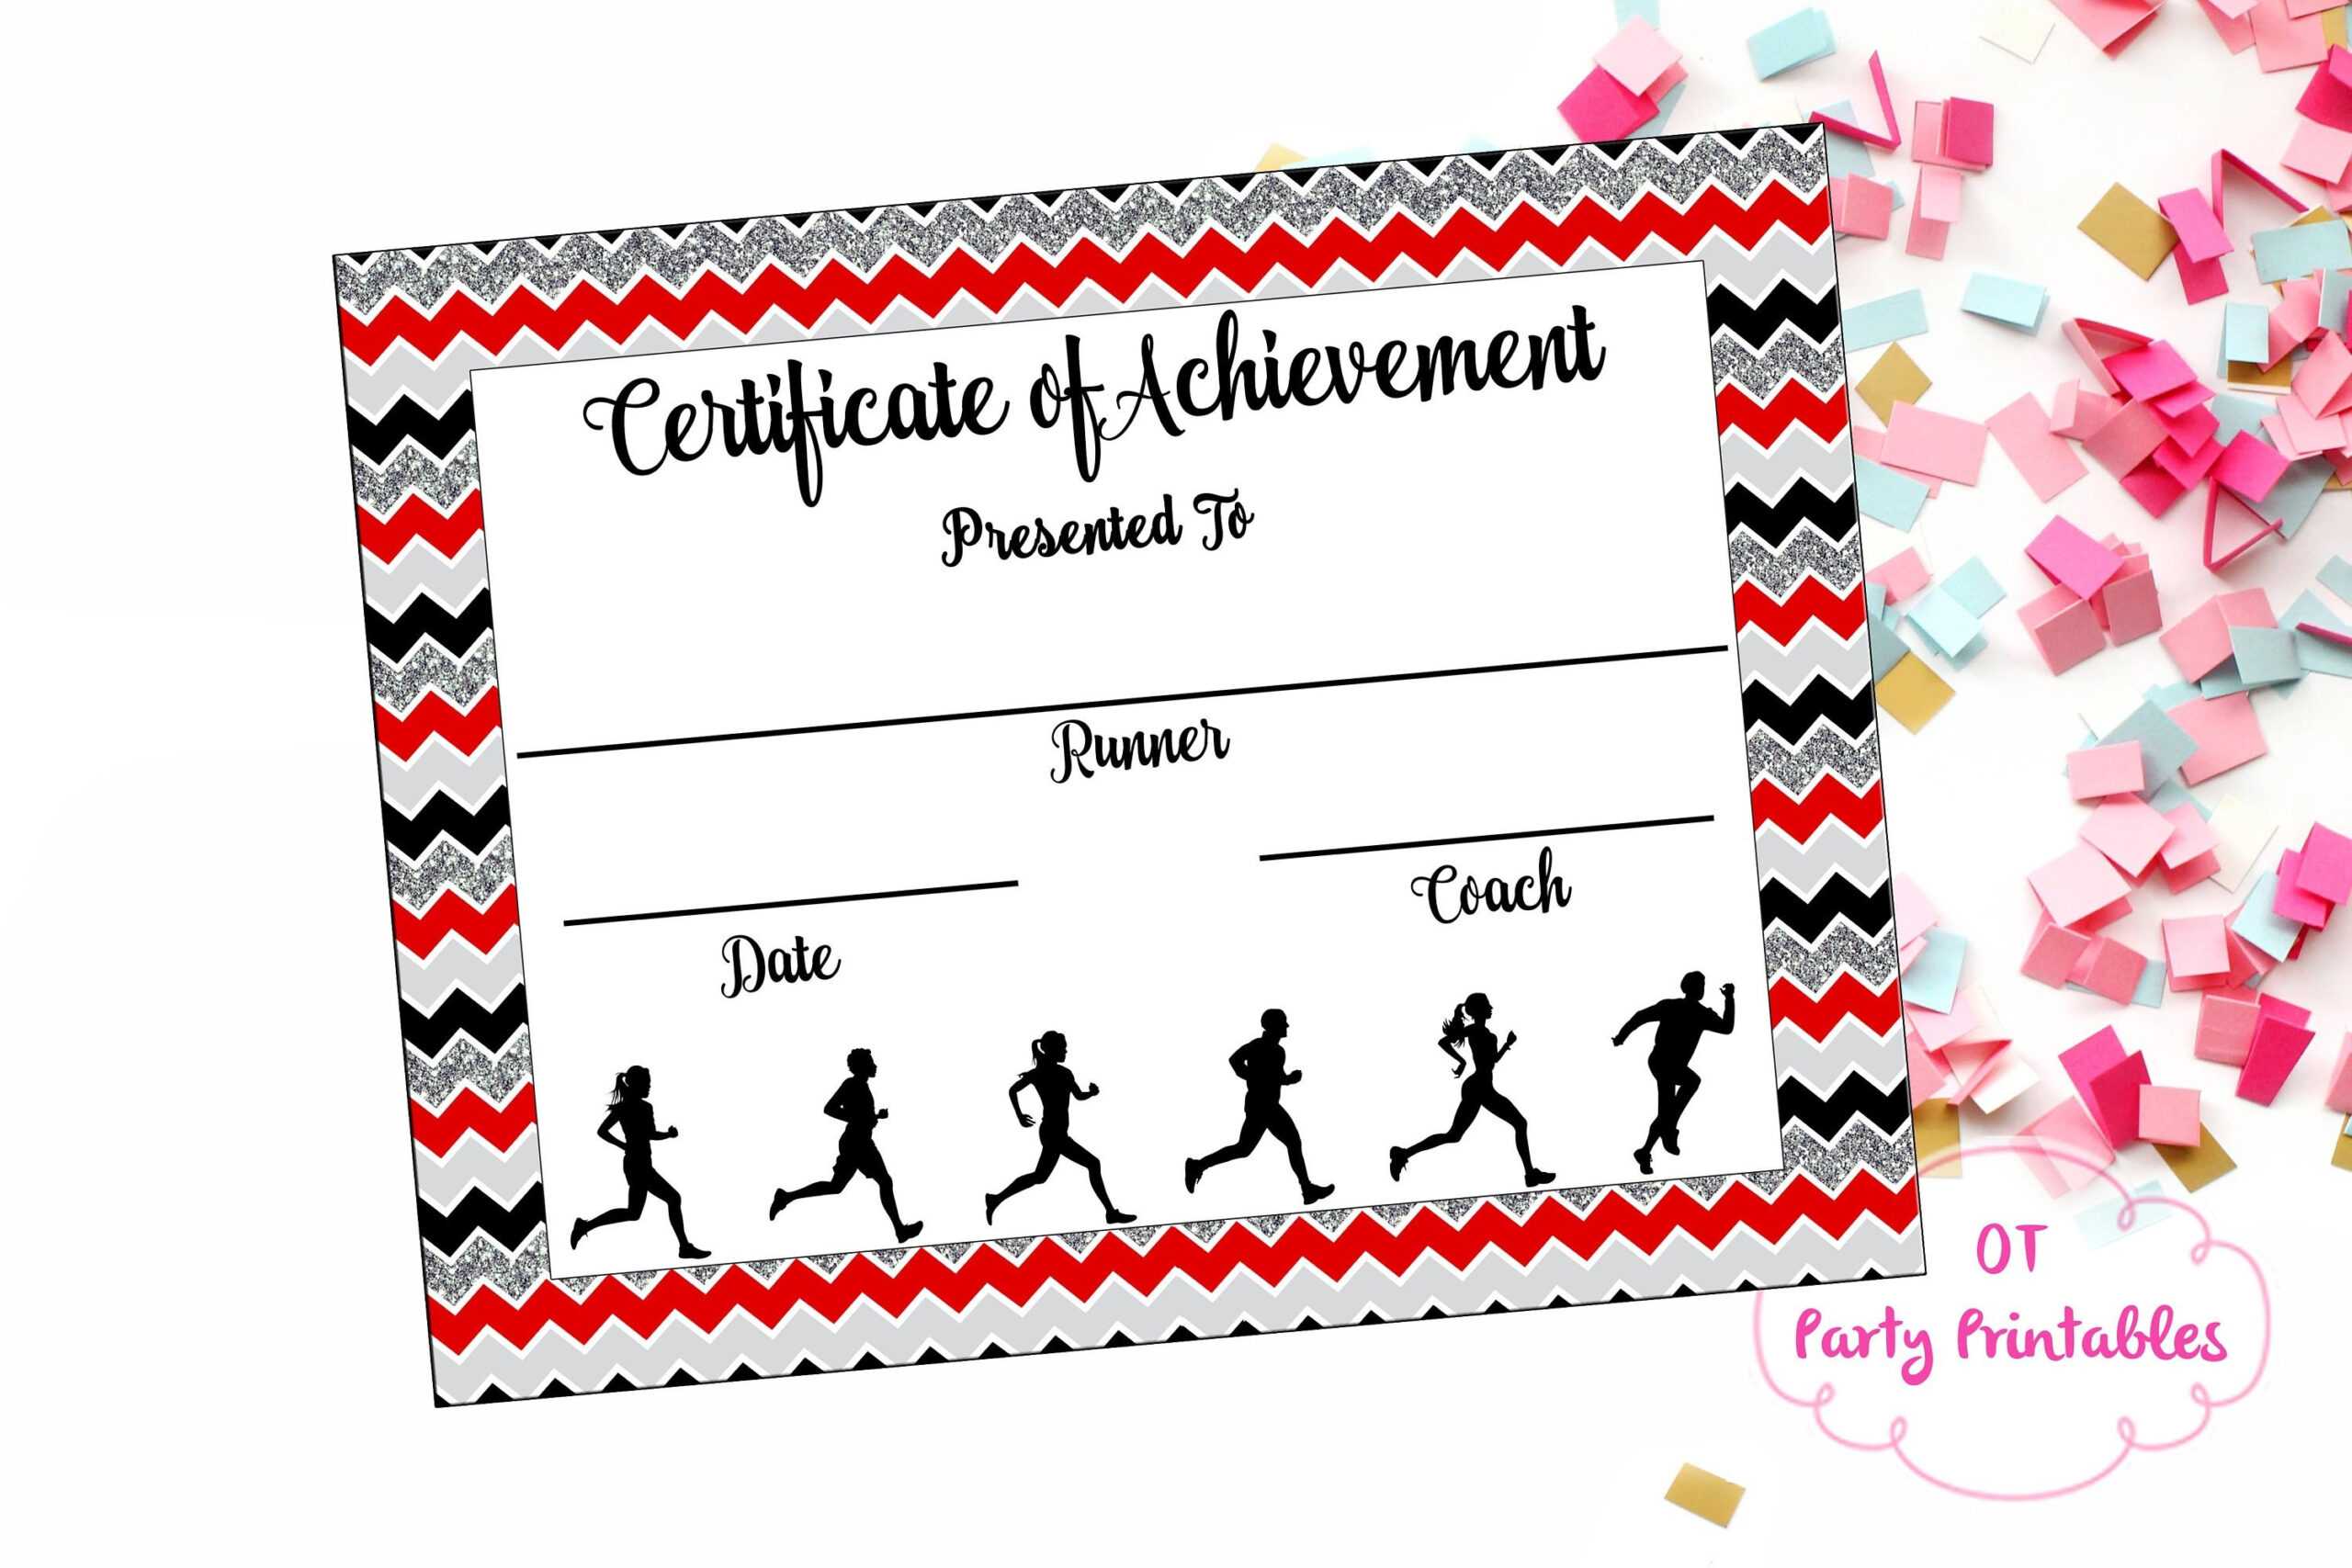 Cross Country Certificate Templates Free Flocker Info In Track And Field Certificate Templates Free